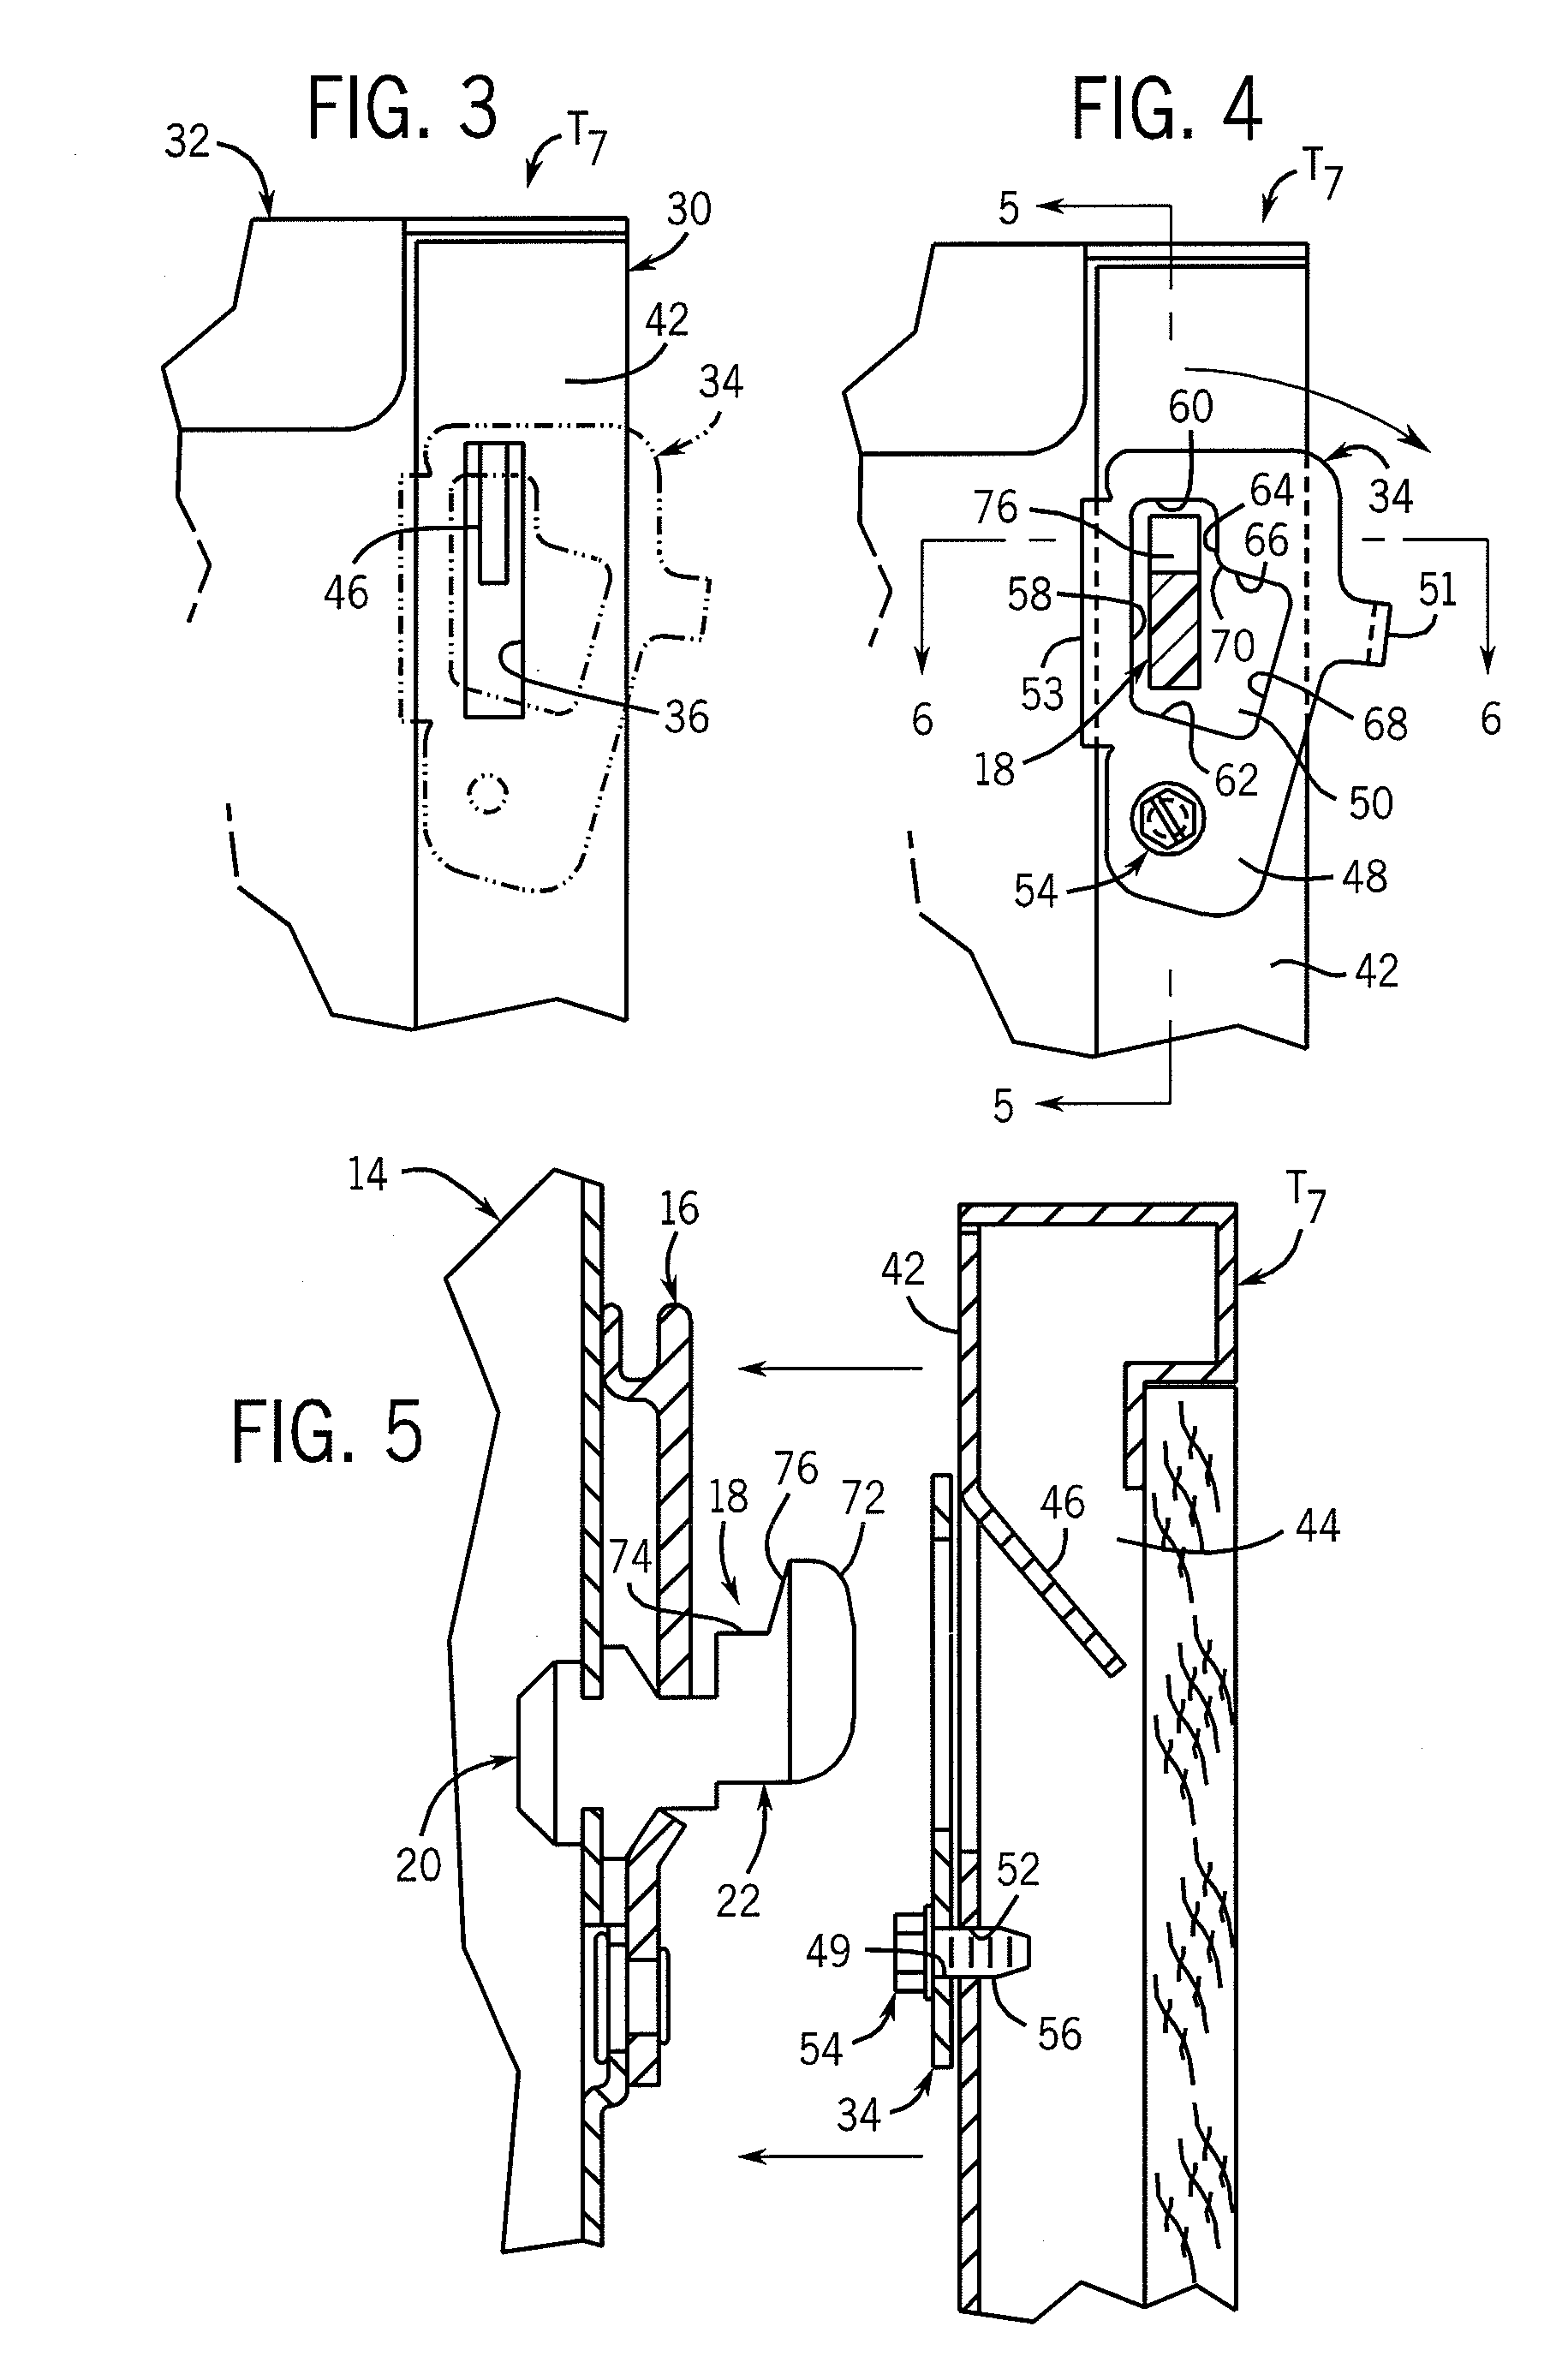 Latch-type tile mounting system